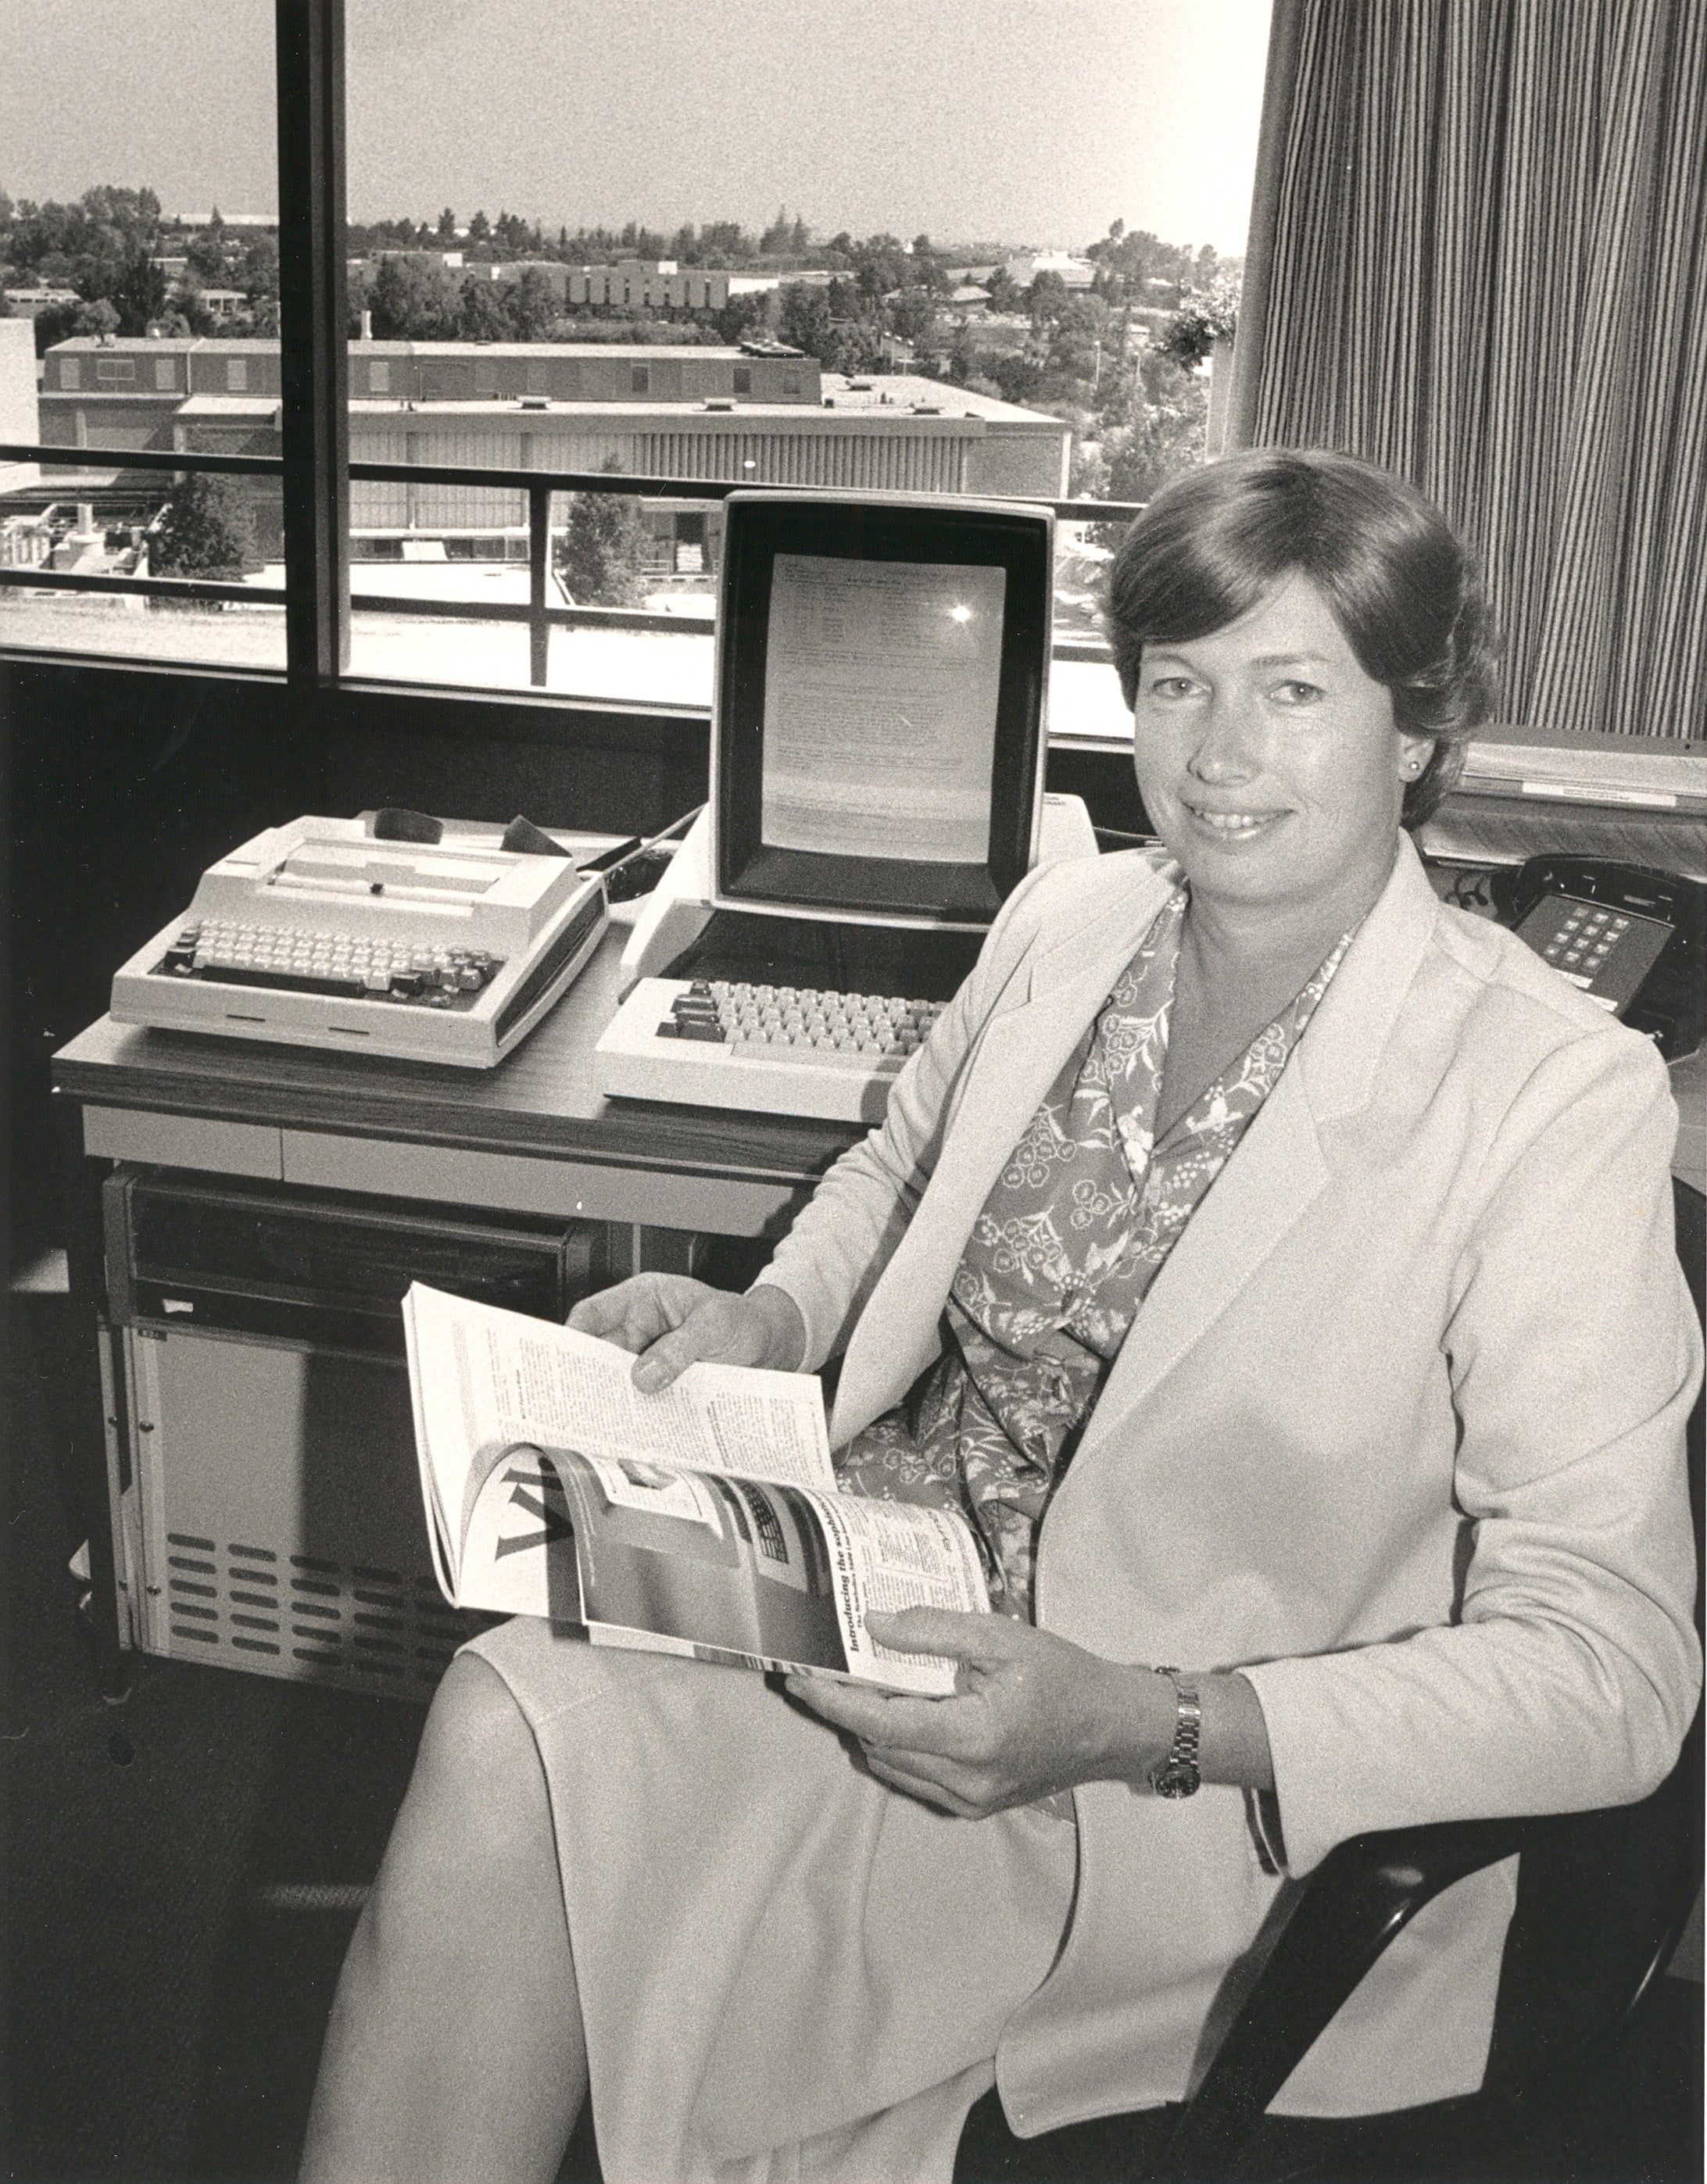 Conway sat next to a Xerox Alto, an early personal computer developed at Xerox's PARC research lab where he worked.